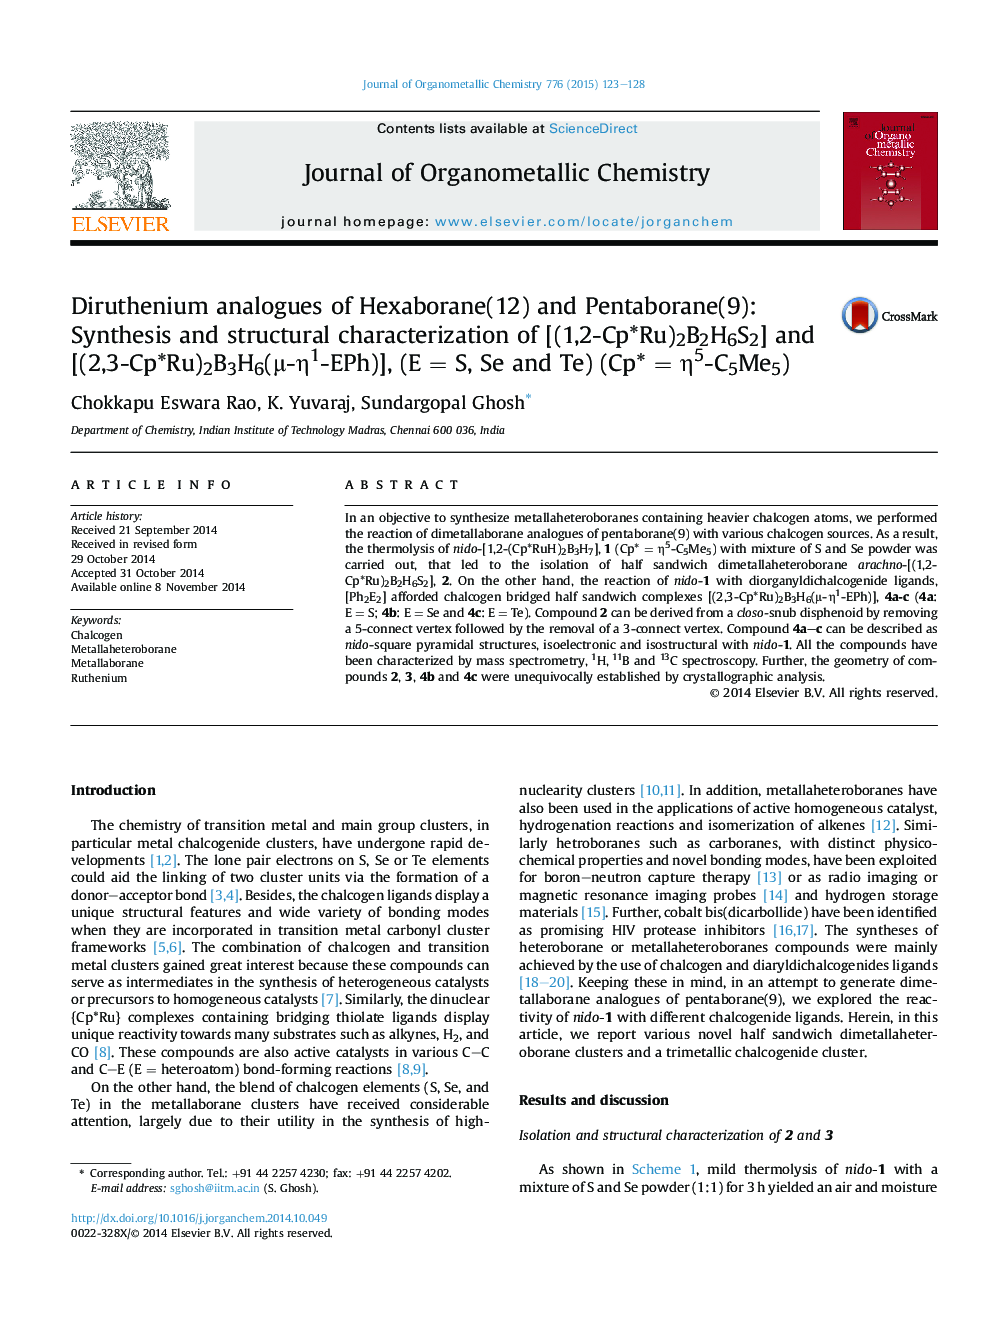 Diruthenium analogues of Hexaborane(12) and Pentaborane(9): Synthesis and structural characterization of [(1,2-Cp*Ru)2B2H6S2] and [(2,3-Cp*Ru)2B3H6(μ-η1-EPh)], (E = S, Se and Te) (Cp* = η5-C5Me5)